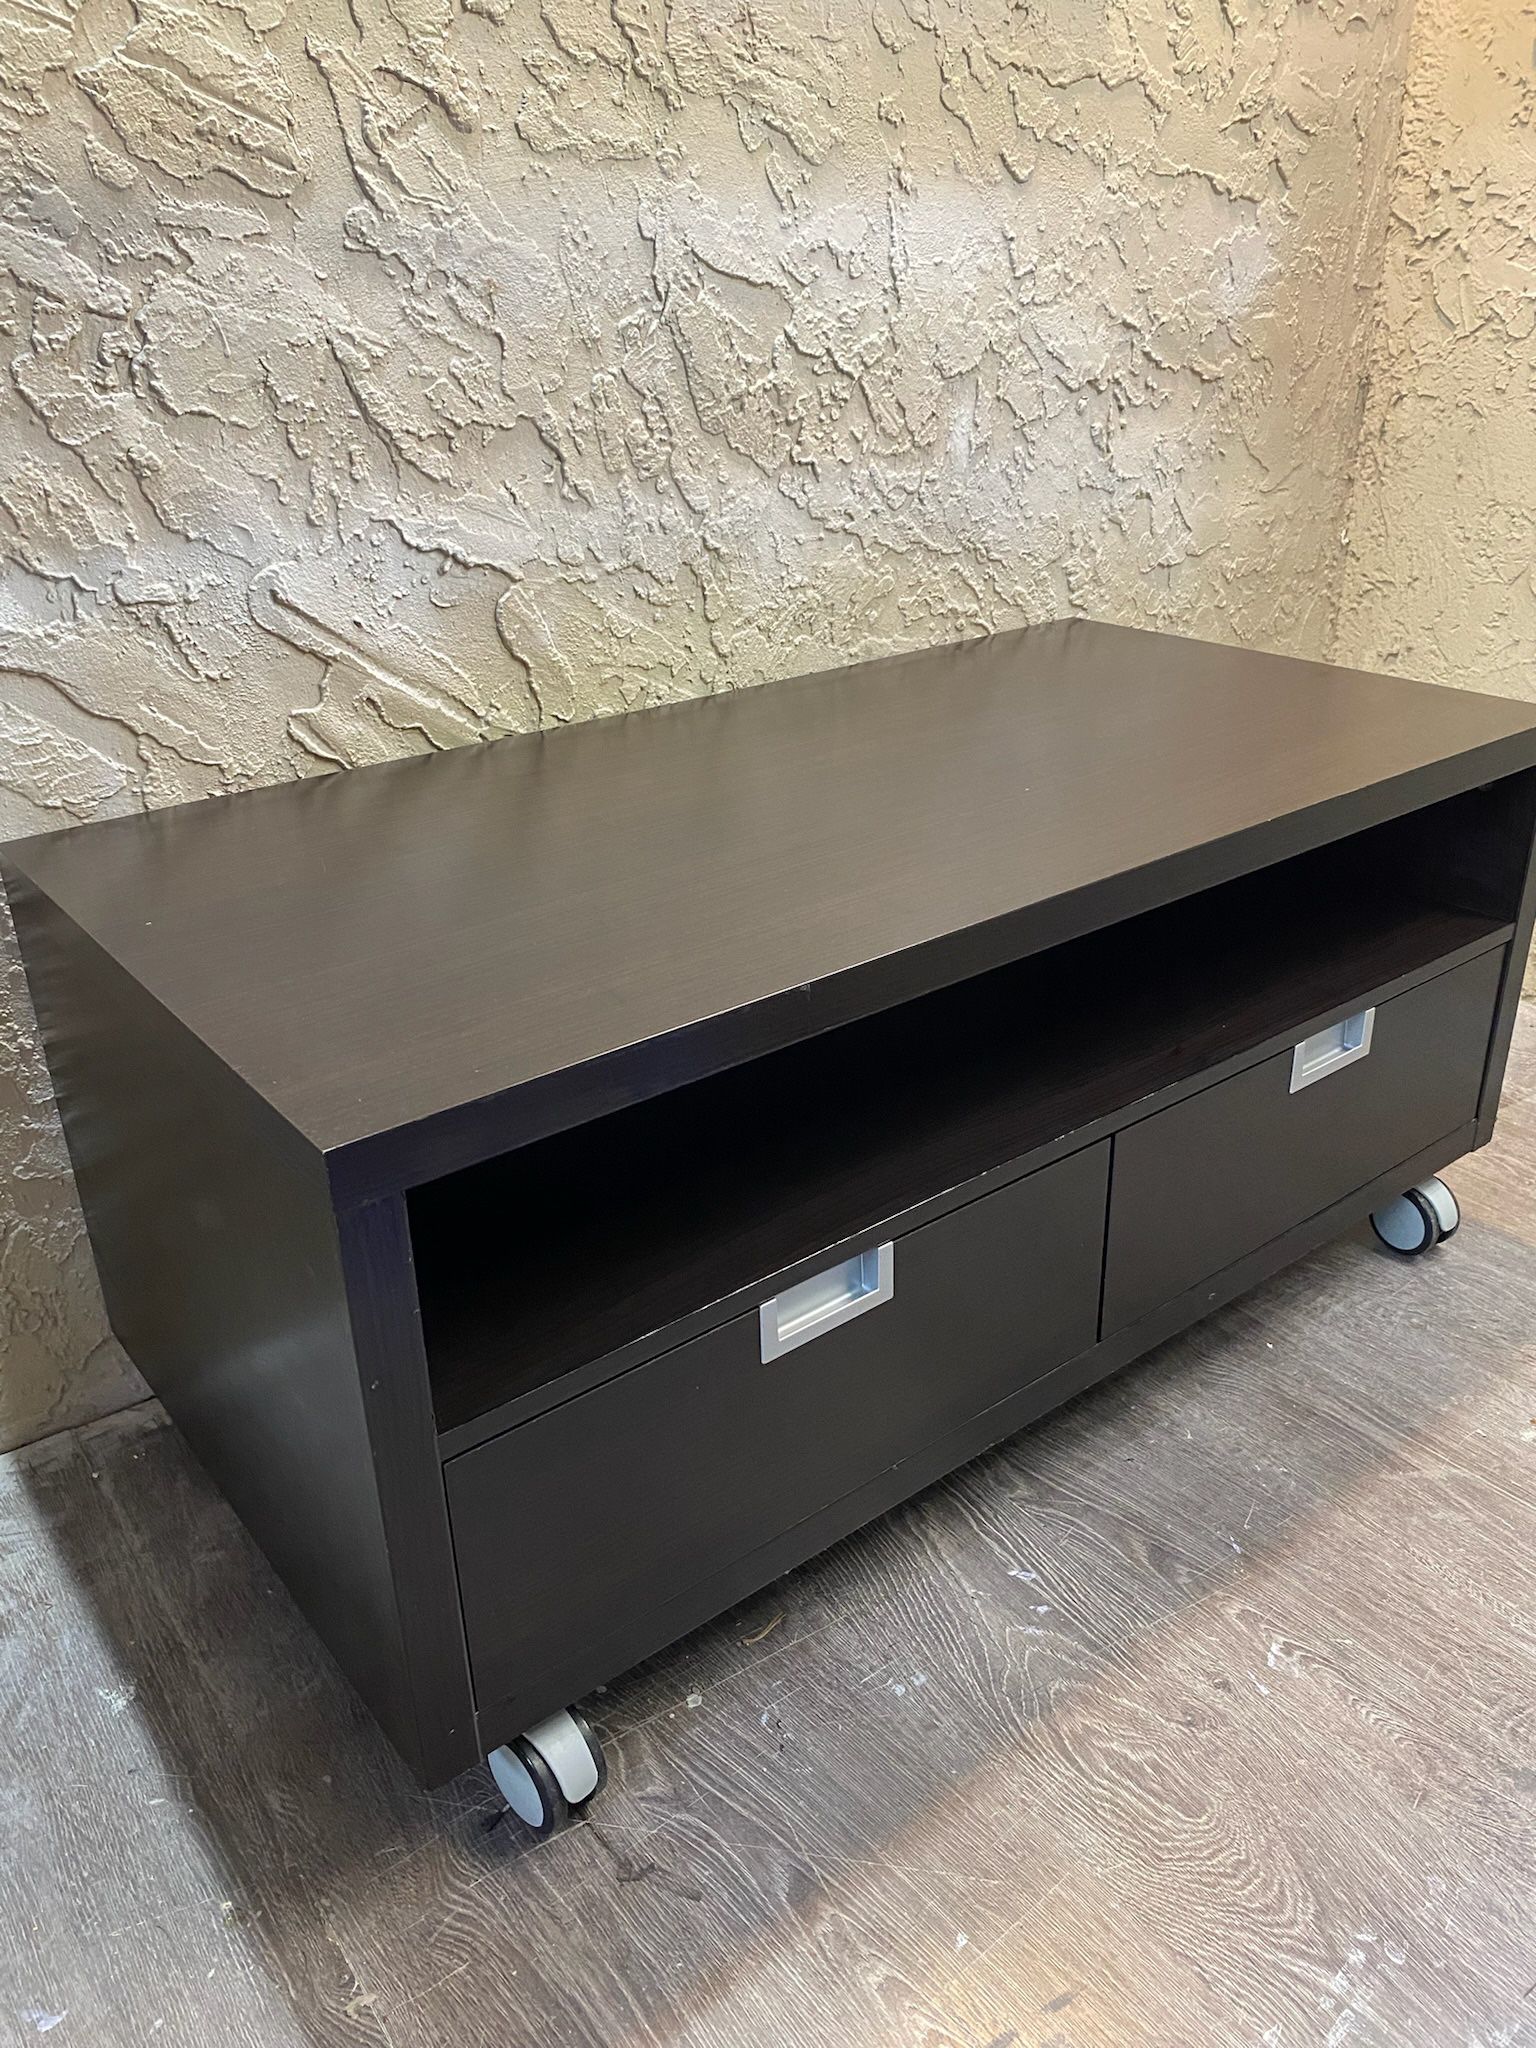 IKEA BESTA TV STAND STORAGE - Delivery Available For A Fee - See My Other Items 😀